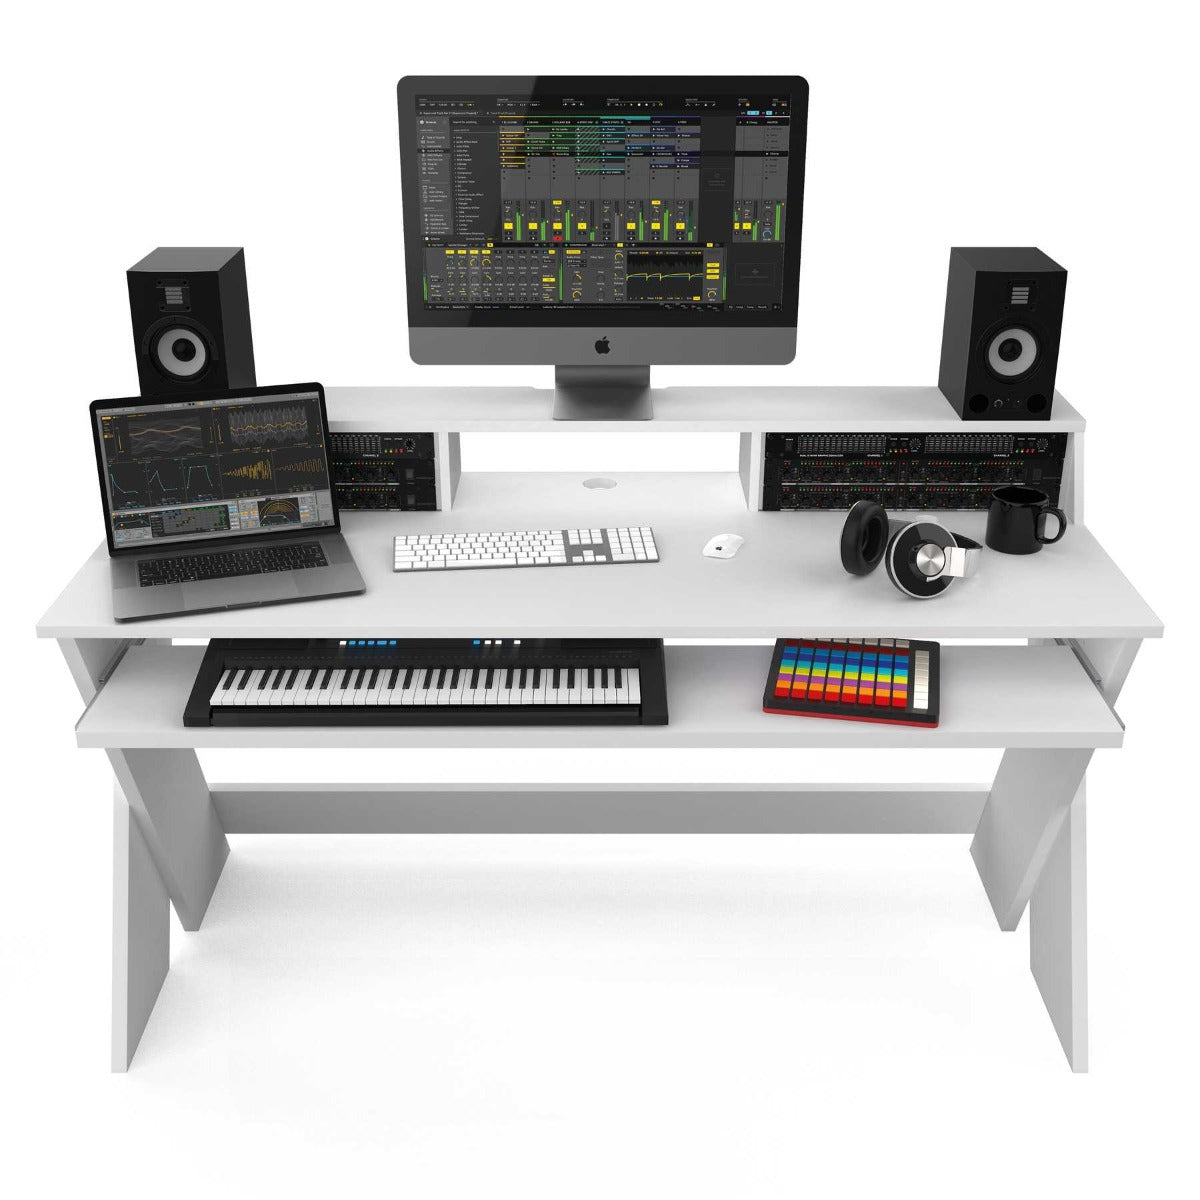 Glorious Sound Desk Pro Black / Furniture for DJs, Producers and